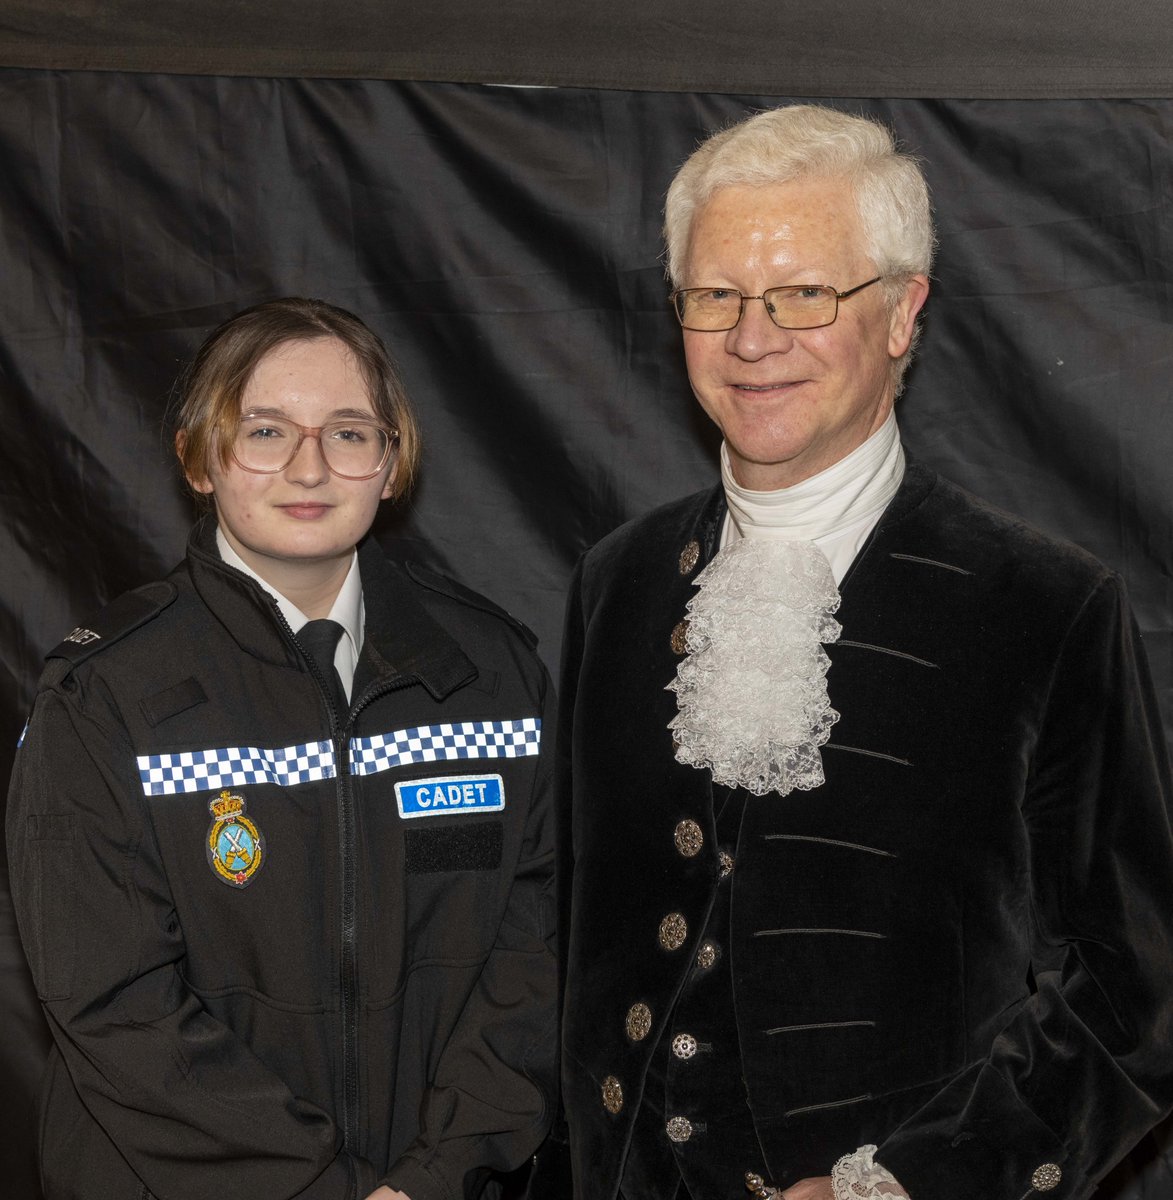 My first duty as High Sheriff was to attend the Police Cadet Awards Ceremony; what an honour to see such well turned out young cadets along with their proud leaders. Also very proud of my own High Sheriff's Police Cadets Wadey and Cleal. #policecadets @highsheriffs @sussex_police